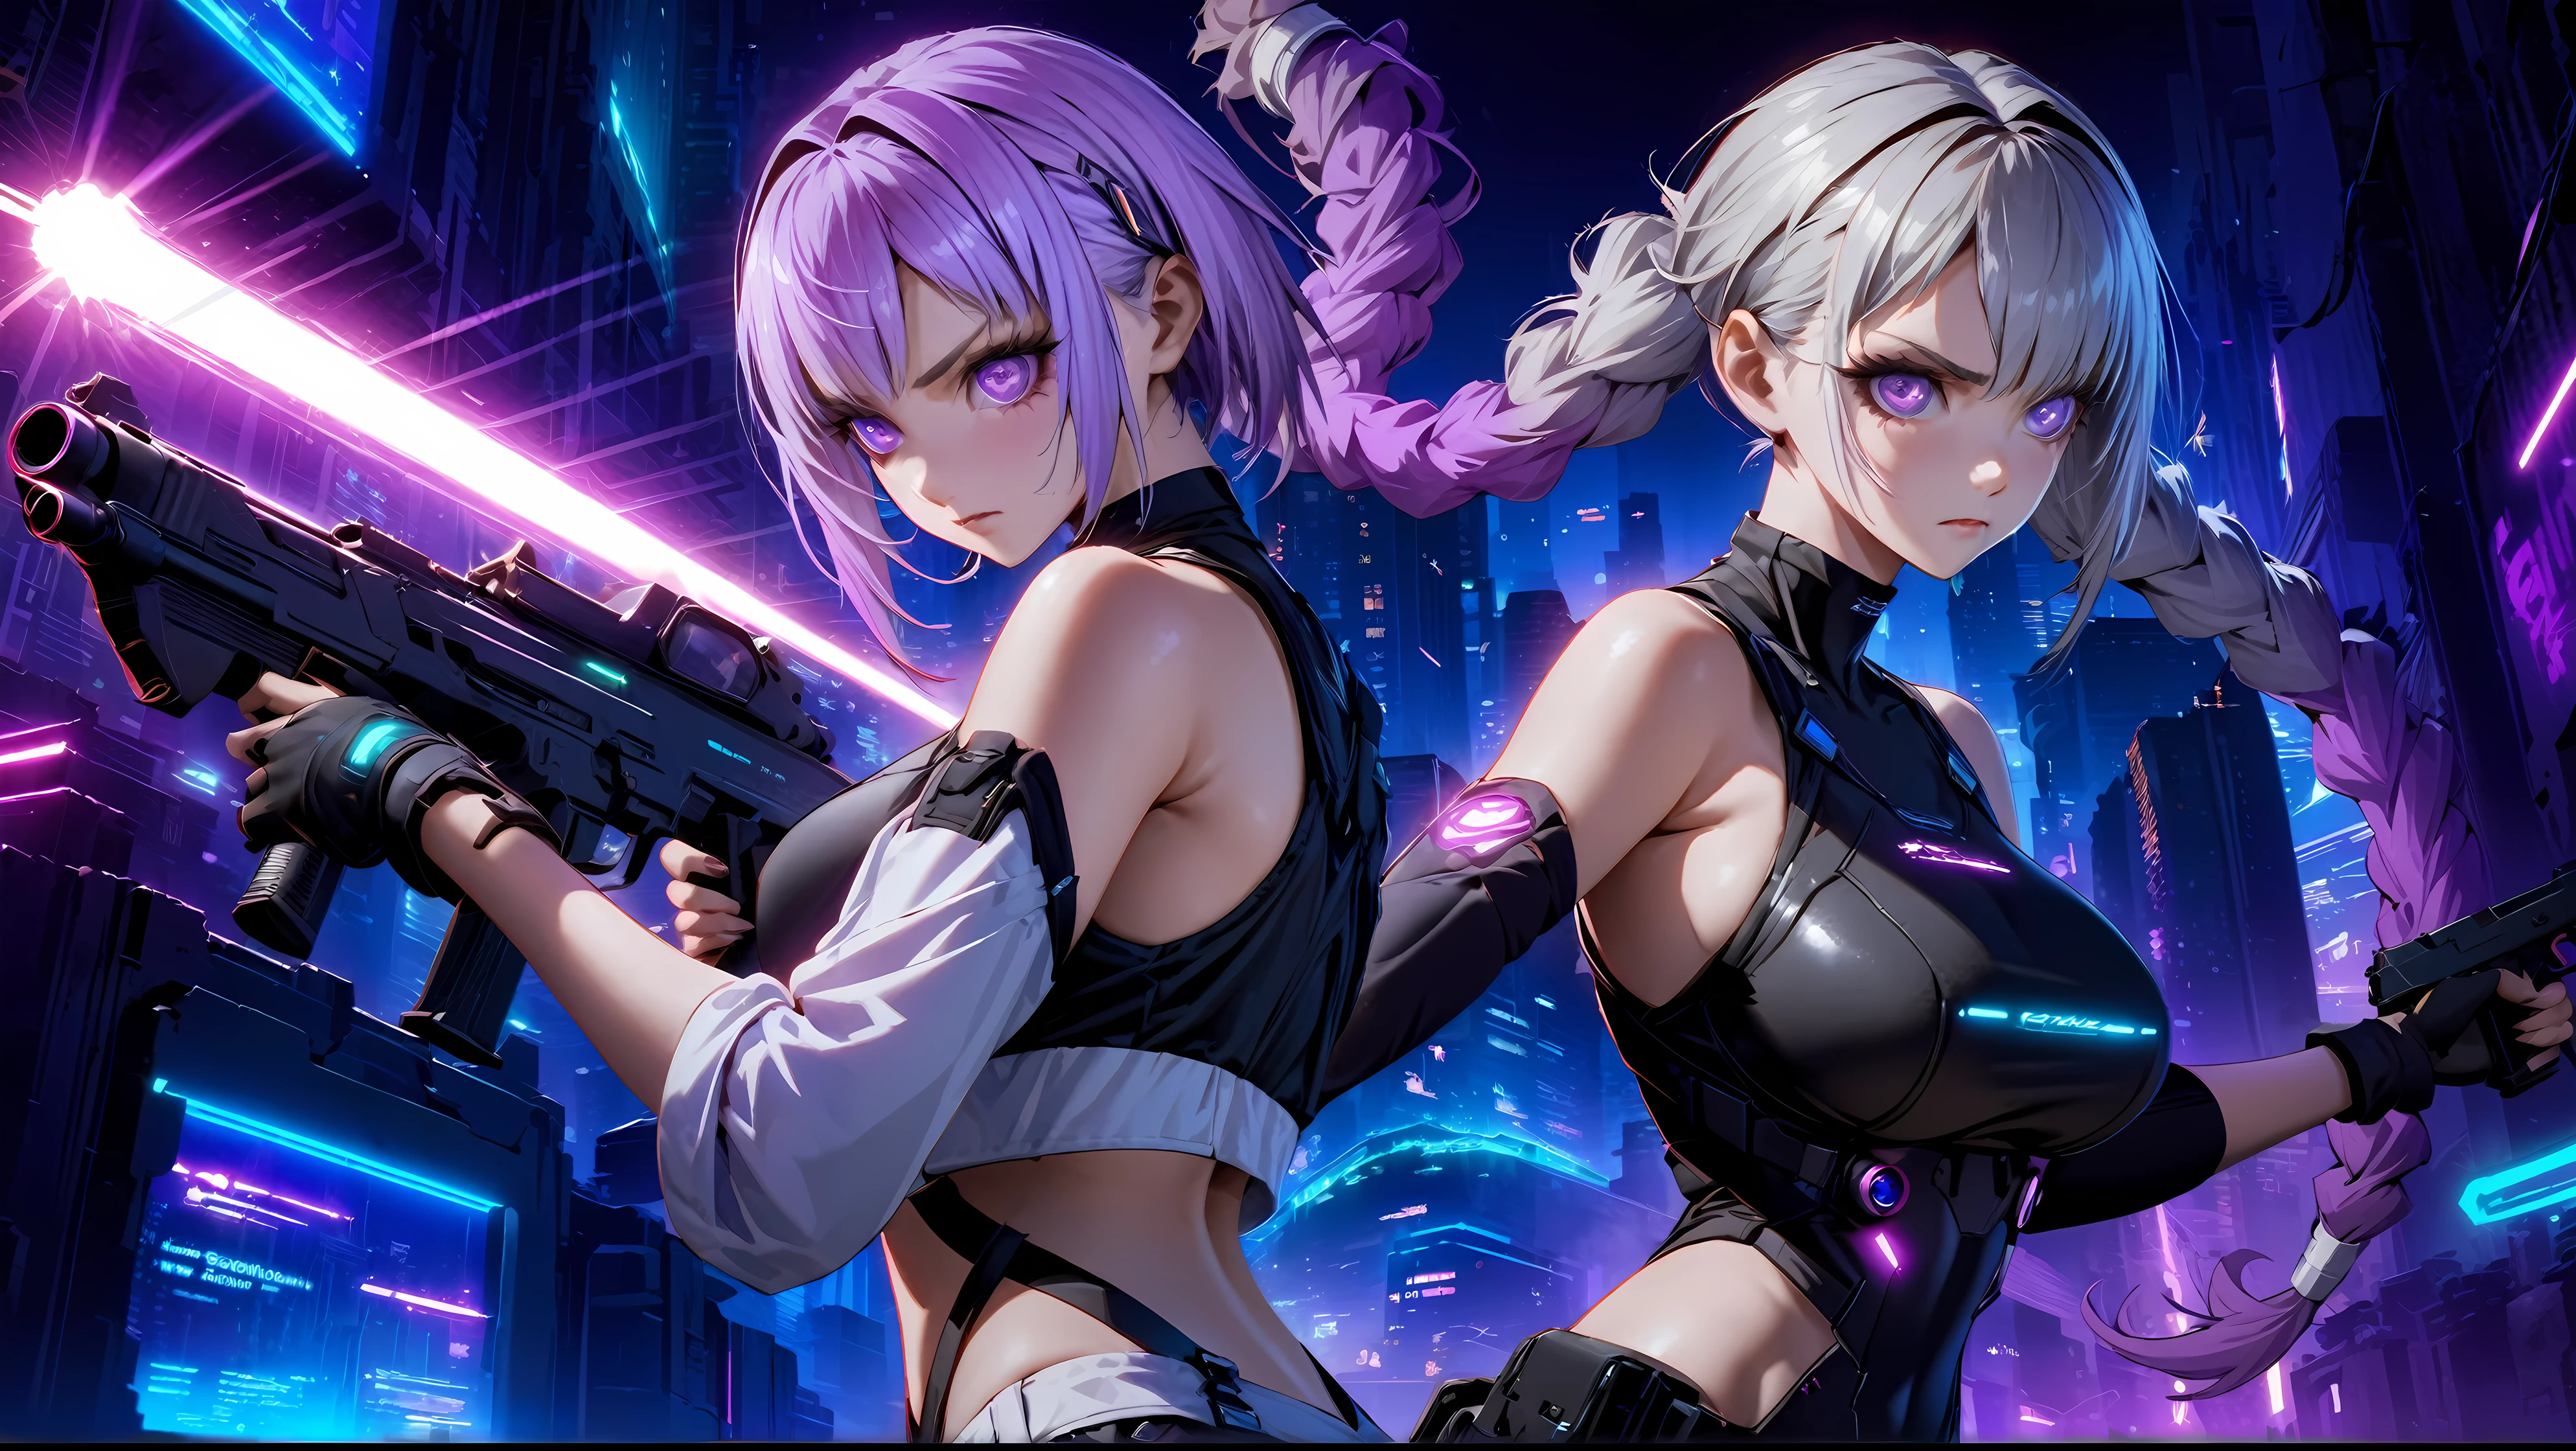 (((Official Art, Unity 8k wallpaper, super detailed, beautiful, beautiful, masterpiece, best quality))), 2 girls, fighting stance, (One of the girls had Short silver hair, black top, Neon Art, cyber punk, arms, Pistol, Rocket Launcher, missile), (The other girl had long purple and white gradation double ponytail twists, bare shoulders, white corset,)，(purple and white gradation color hair:1.1), background is a cyberpunk city